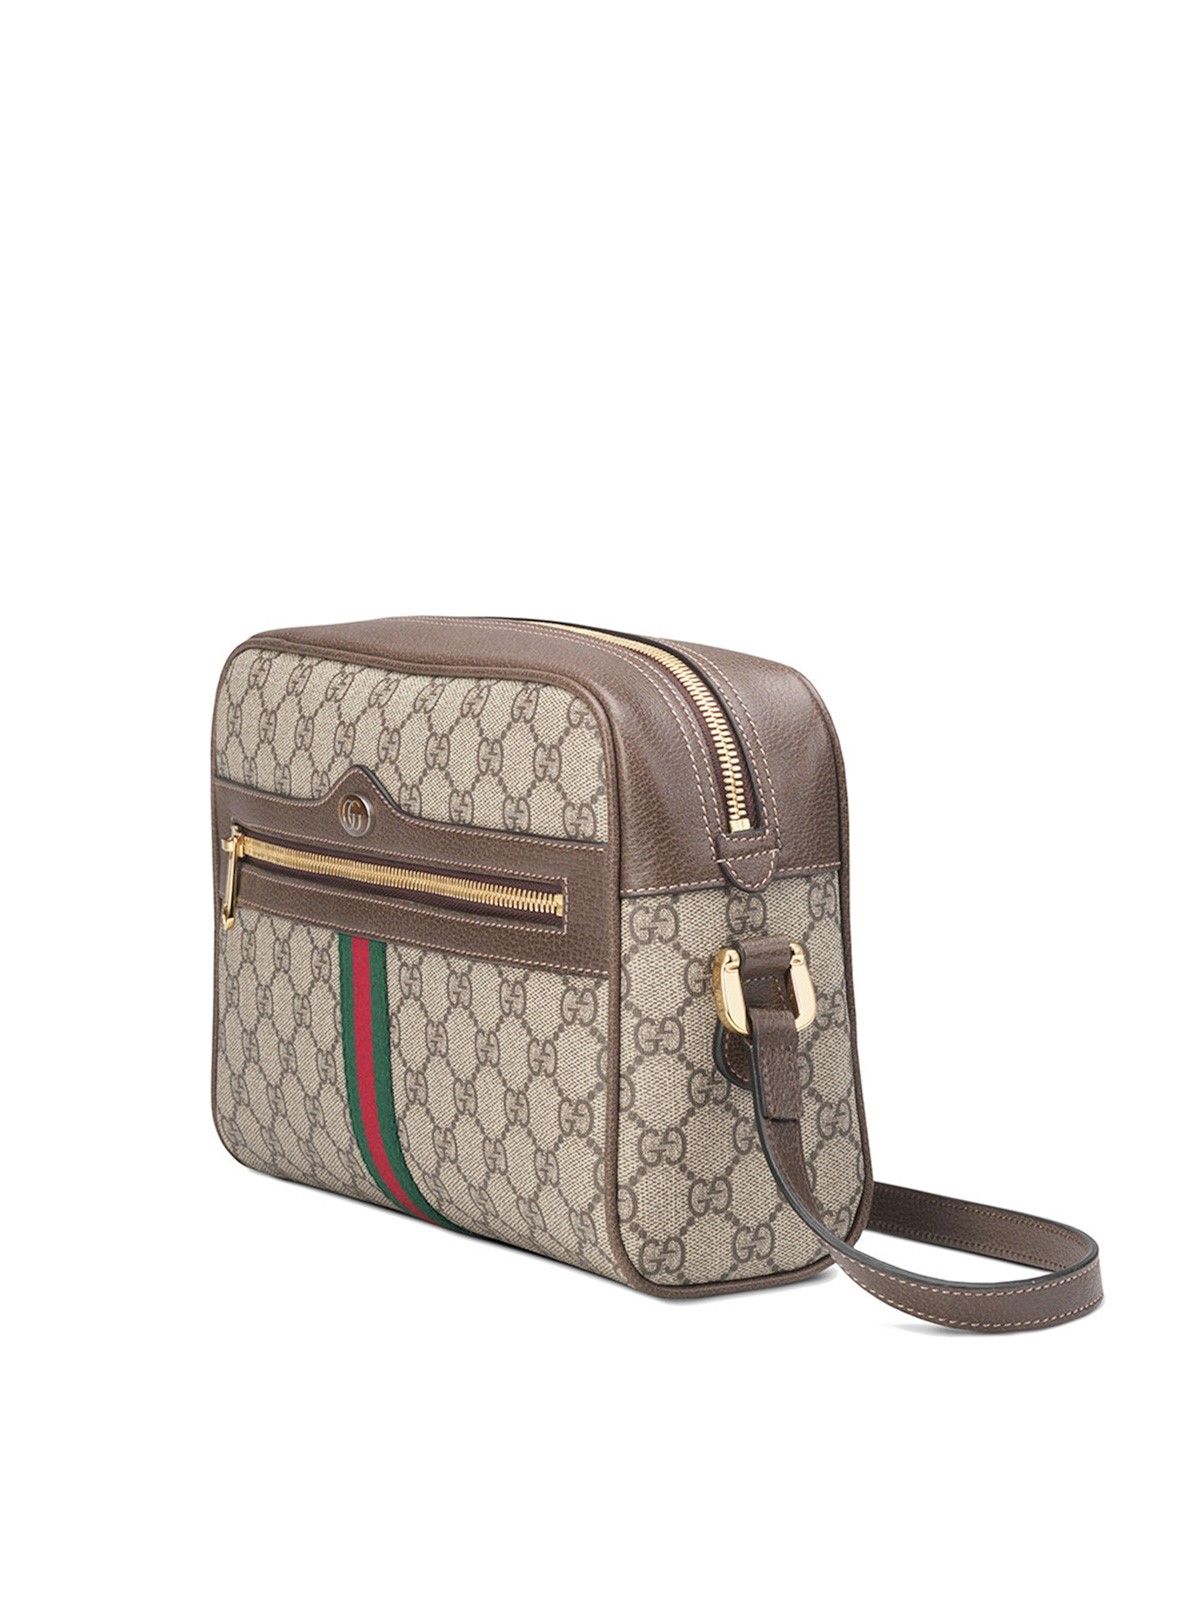 gucci OPHIDIA SHOULDER BAG available on mediakits.theygsgroup.com - 22340